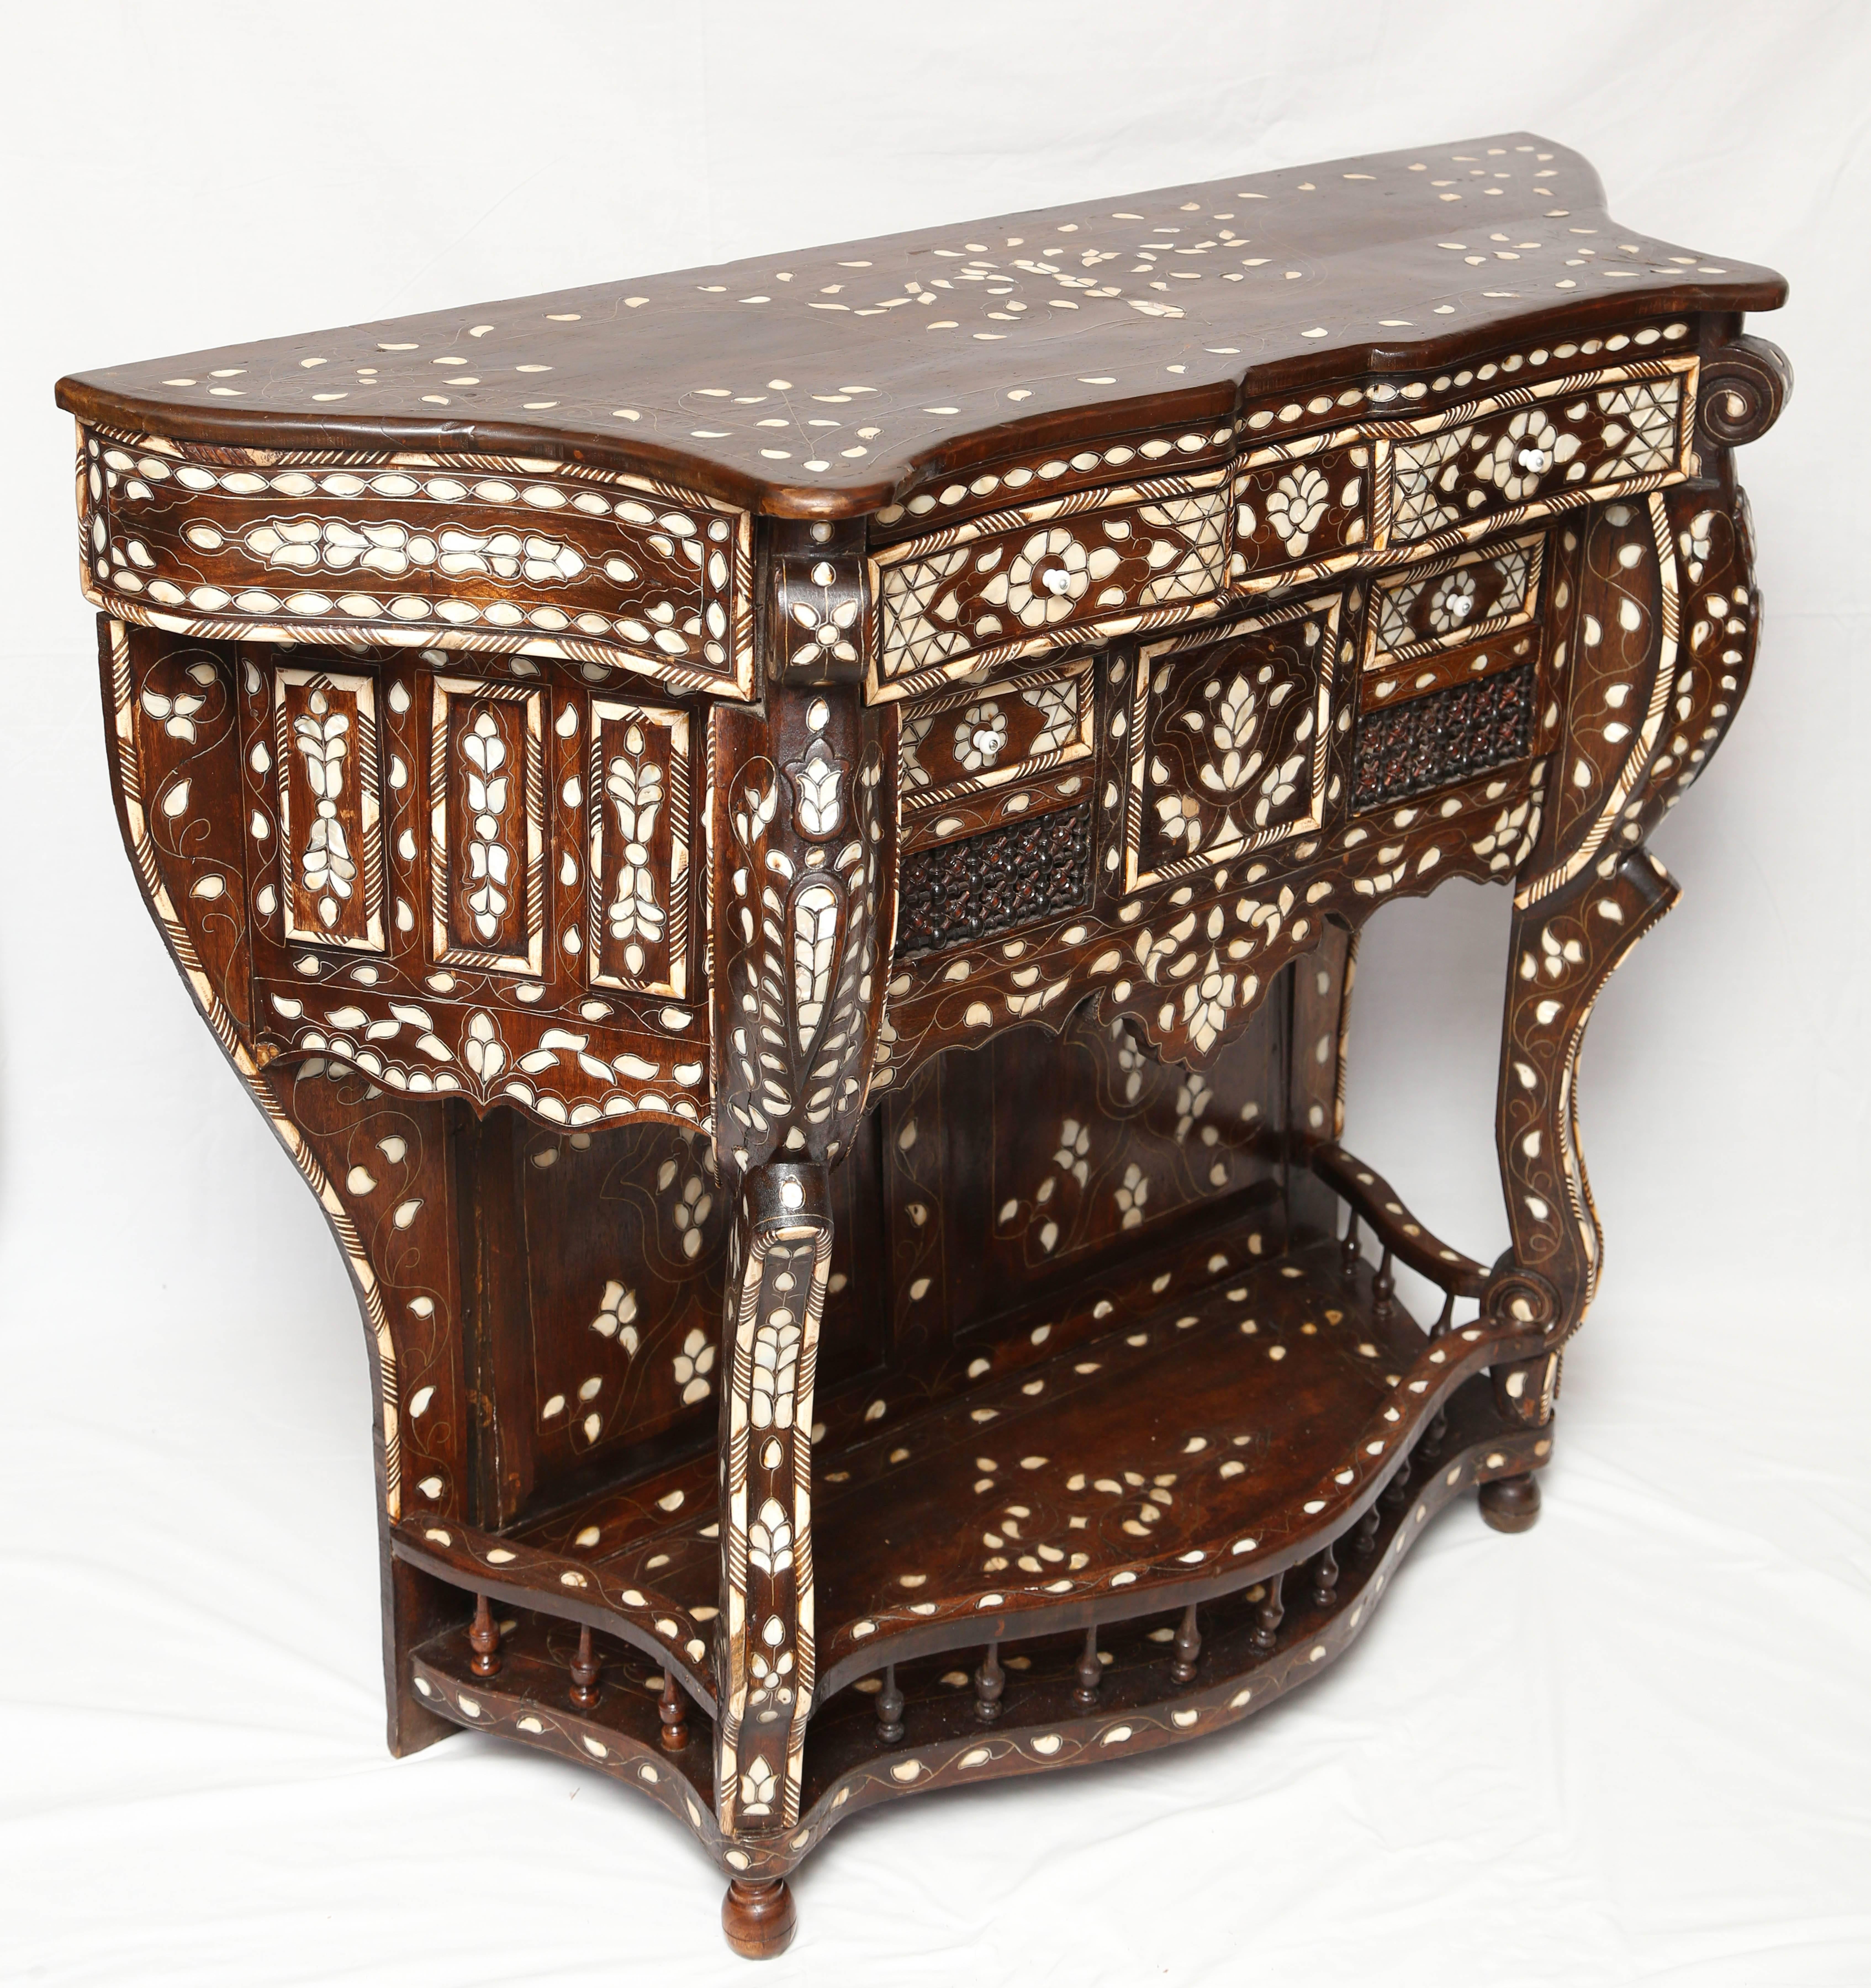 Syrian Mother-of-Pearl Inlaid Console 1